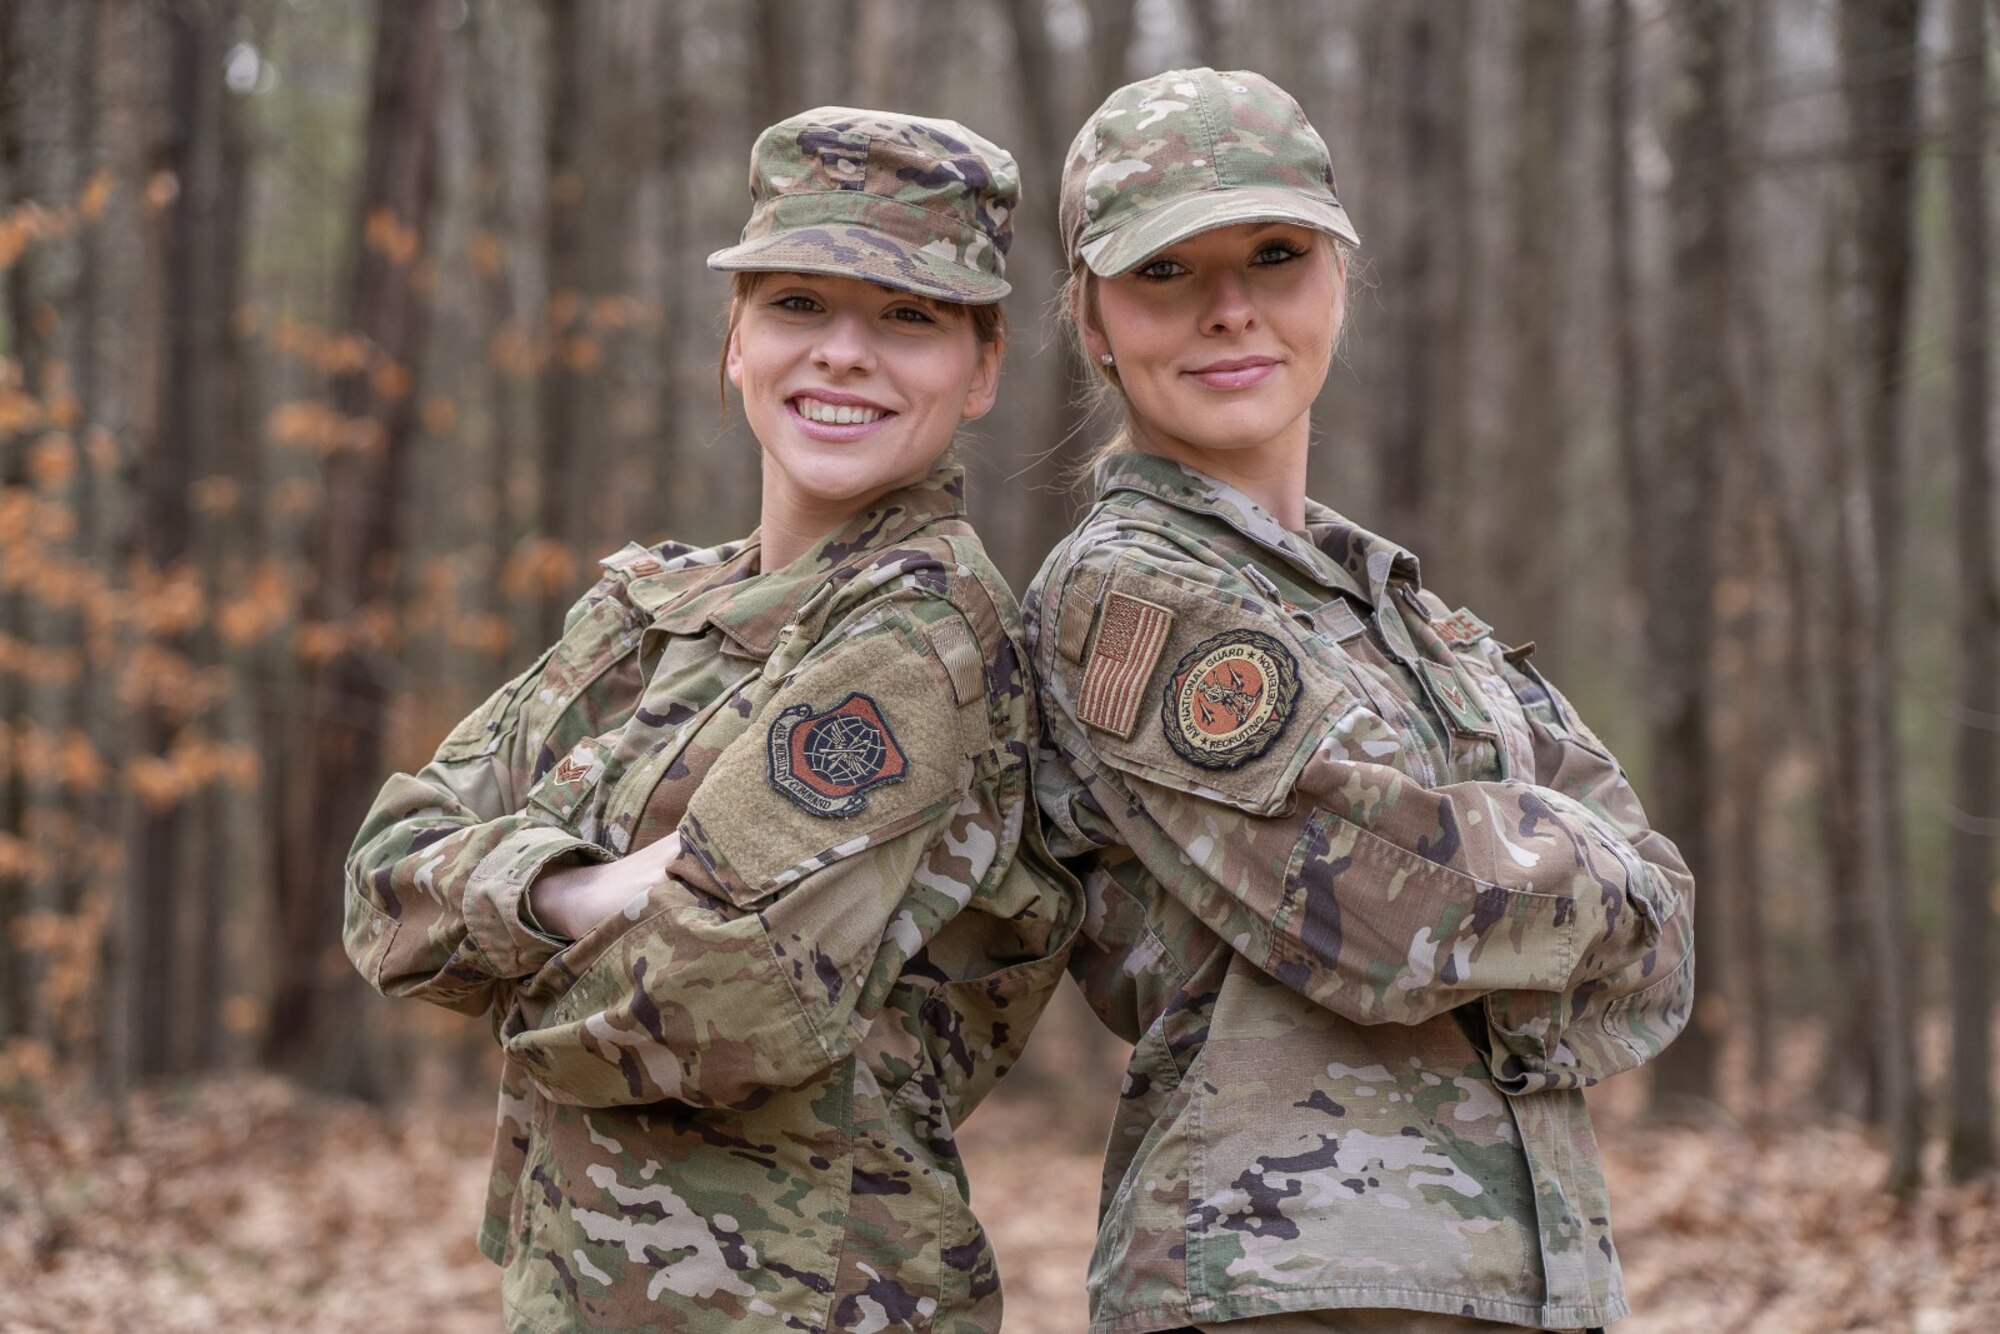 From left, Senior Airmen Gillian and Olivia Conley, fraternal twin sisters, pose in Northfield, New Hampshire, on Dec. 10, 2022. The Conleys first enlisted in the New Hampshire Air National Guard in 2017 and attended basic training and technical school together. Olvia recently transferred to the Connecticut Air National Guard for a full-time recruiting position, while Gillian serves at Pease Air National Guard Base in Newington, New Hampshire, as a respiratory therapist with the 157th Medical Group. They participated in a brief National Twin Day Q&A this year to recognize the holiday.